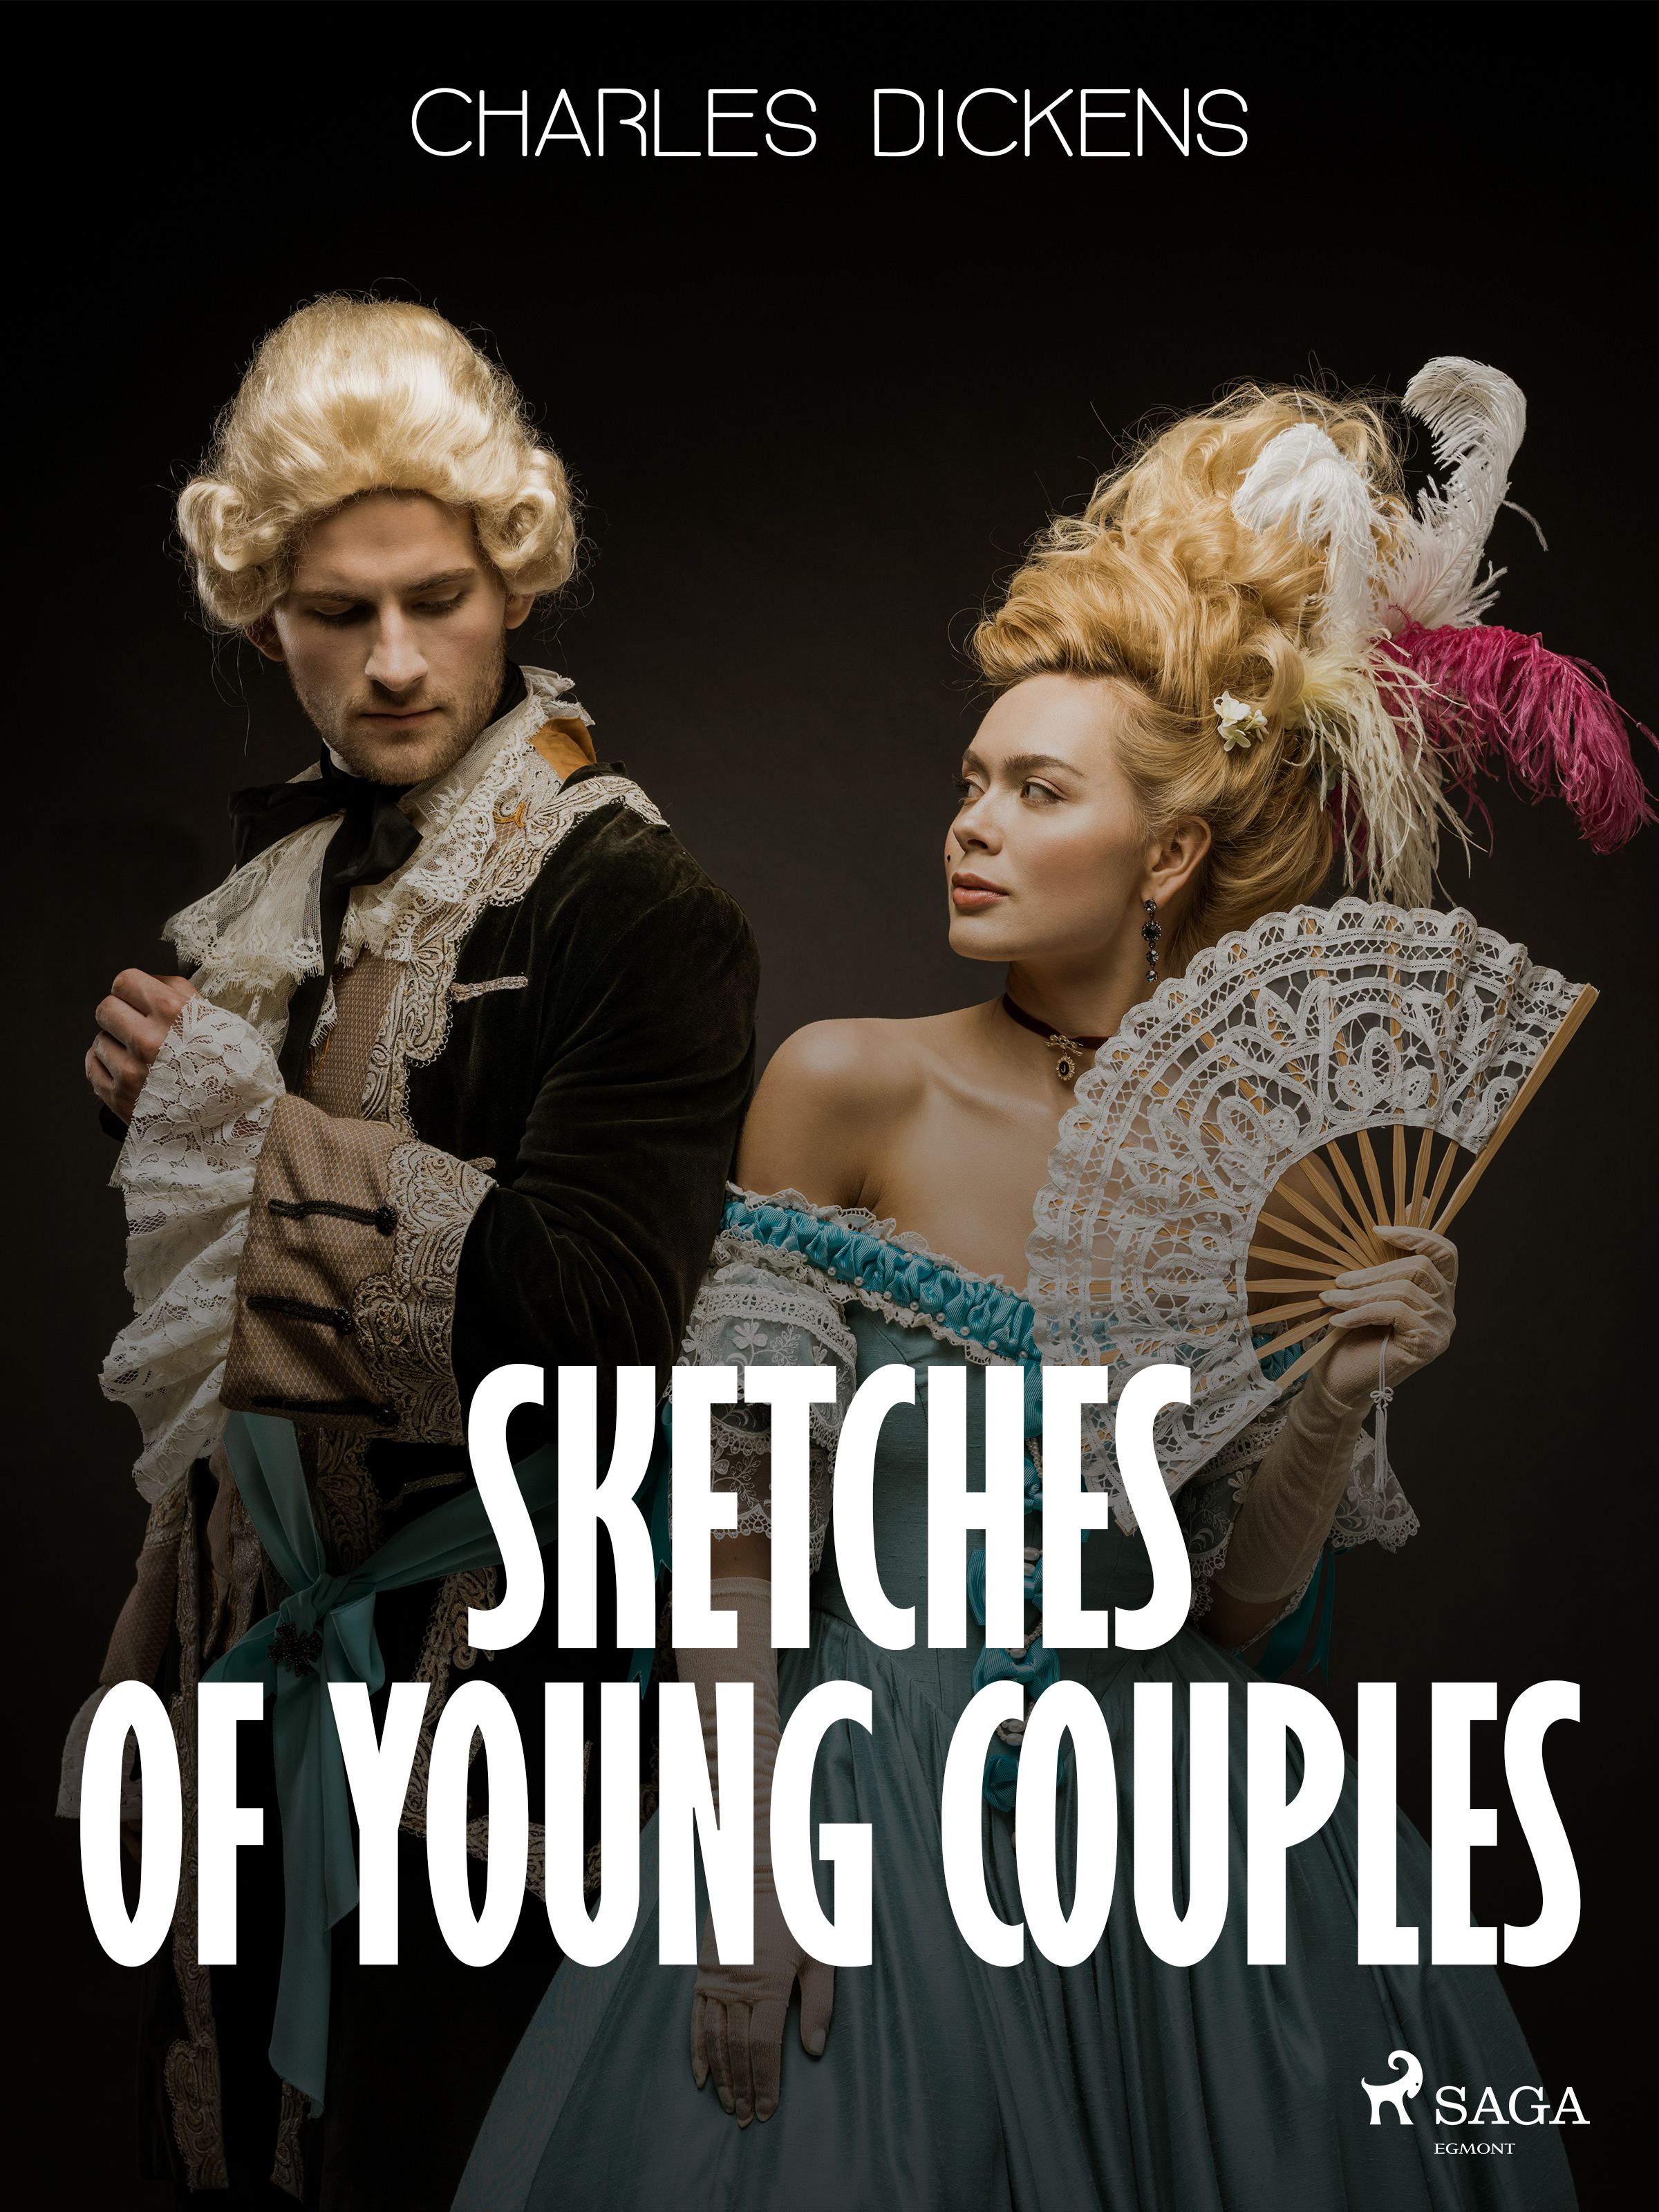 Sketches of Young Couples, eBook by Charles Dickens